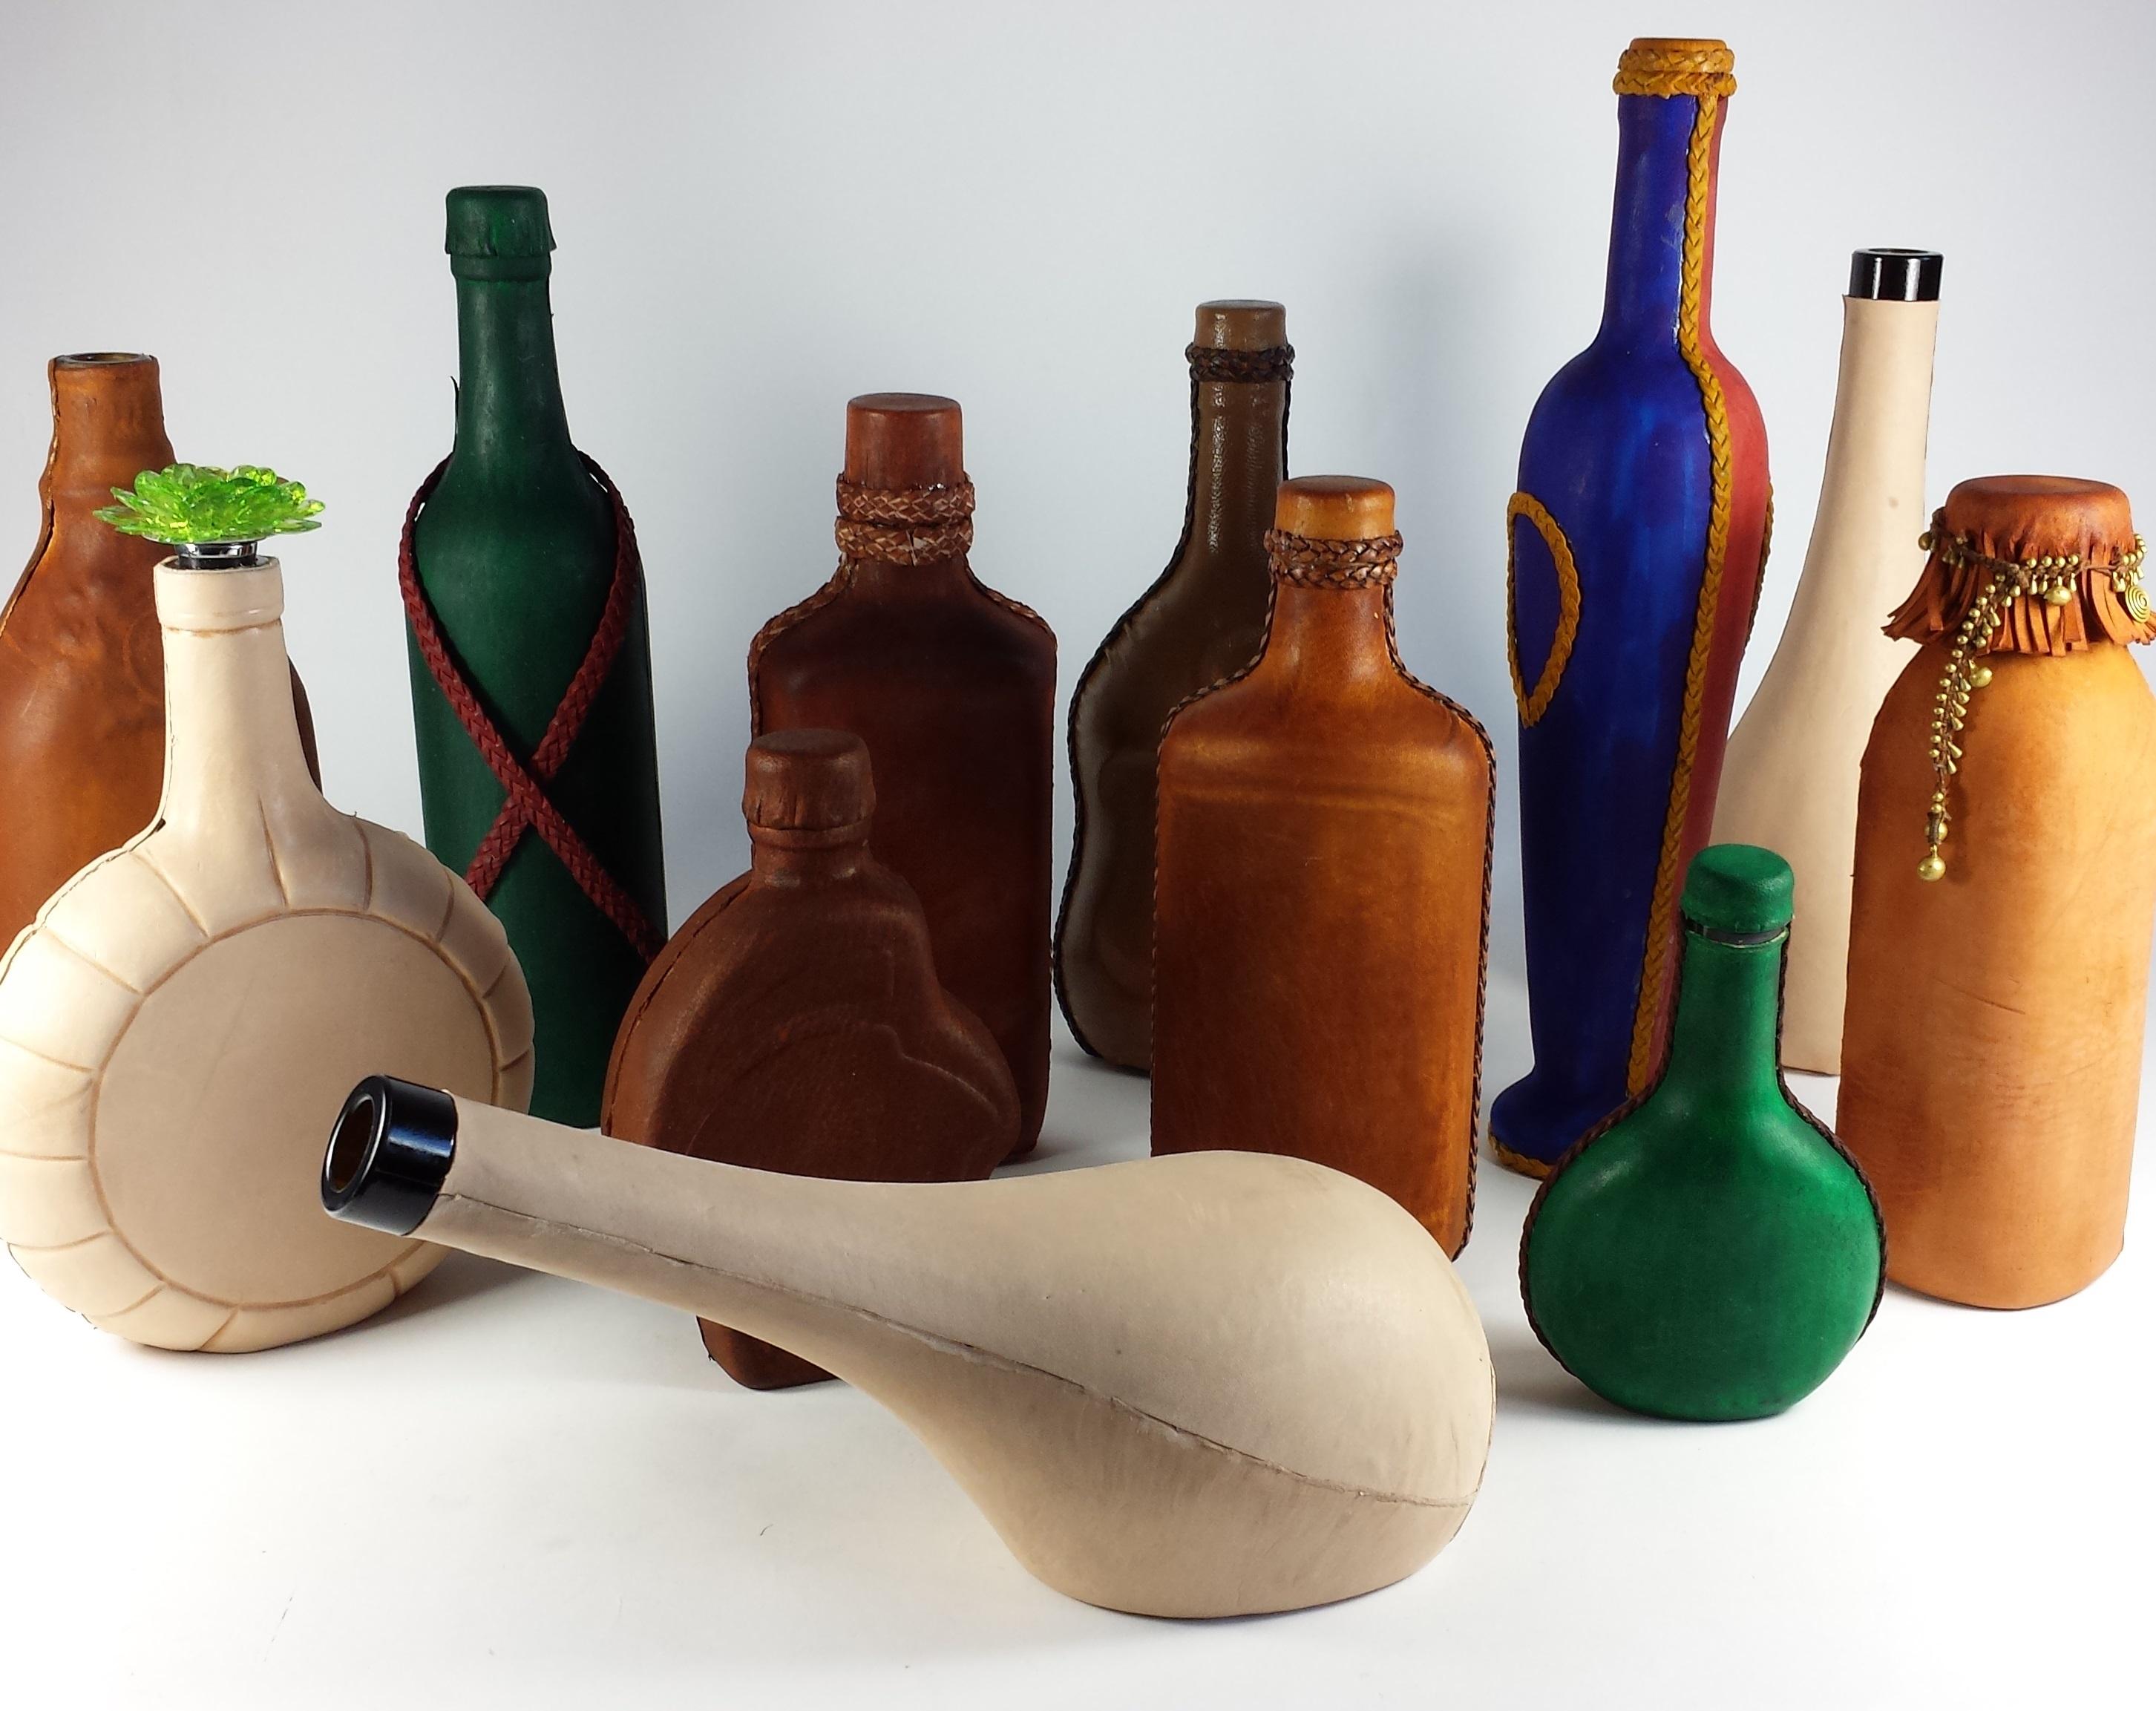 Covering a Glass Bottle with NZ's Sue Nelson